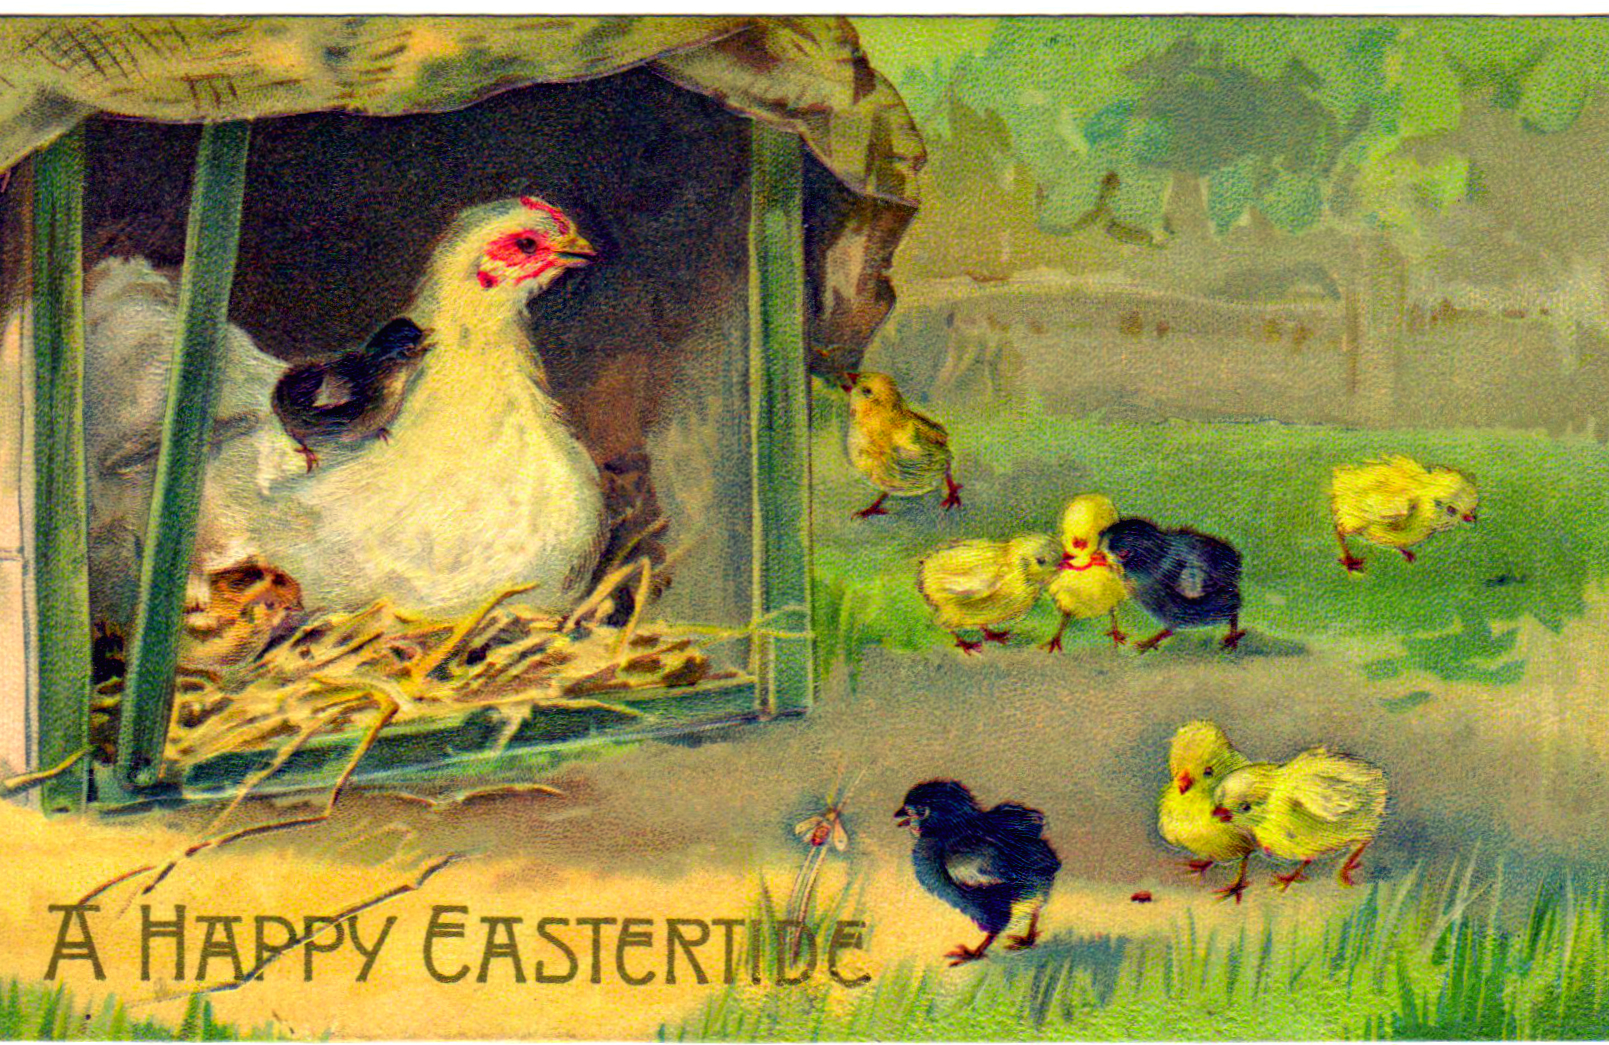 This is a Free Vintage Illustration of an Easter Chicken and Chicks from an Antique Easter Postcard